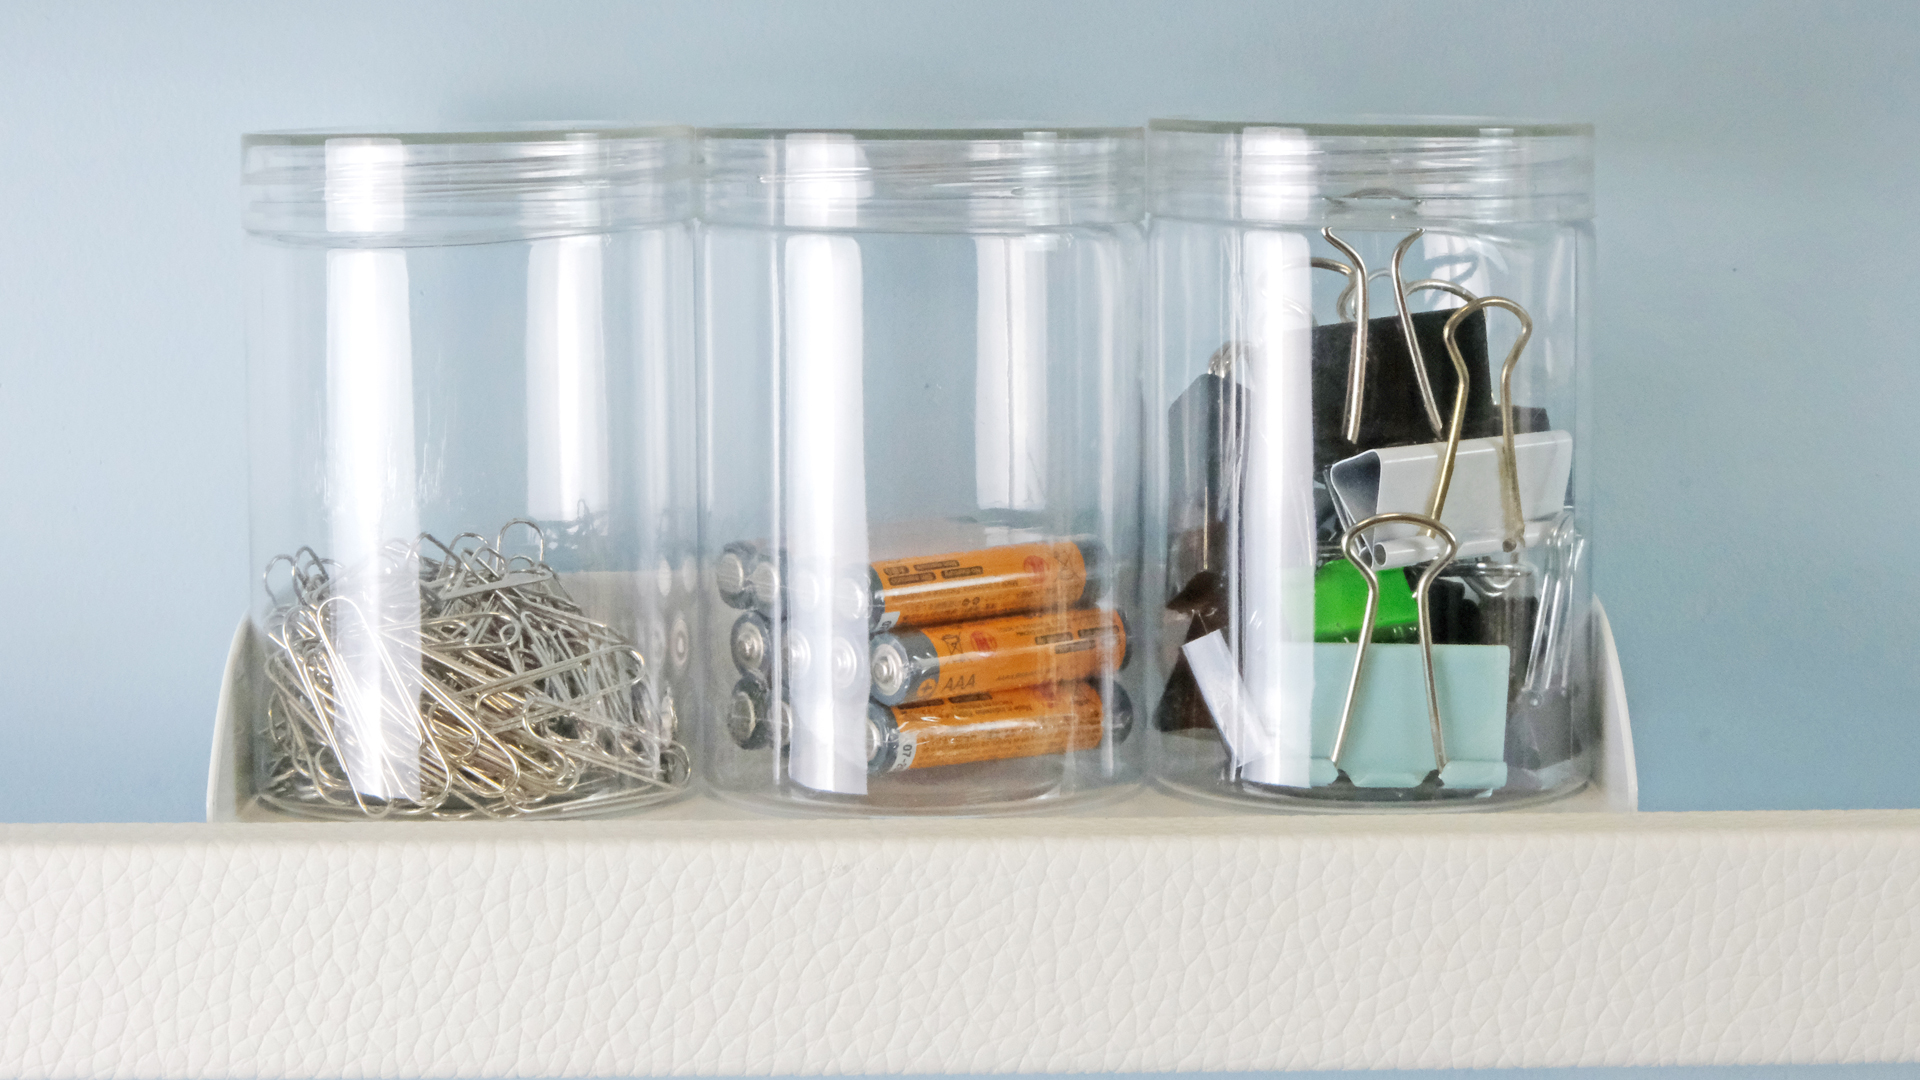 Pencil Tray with Plastic Containers